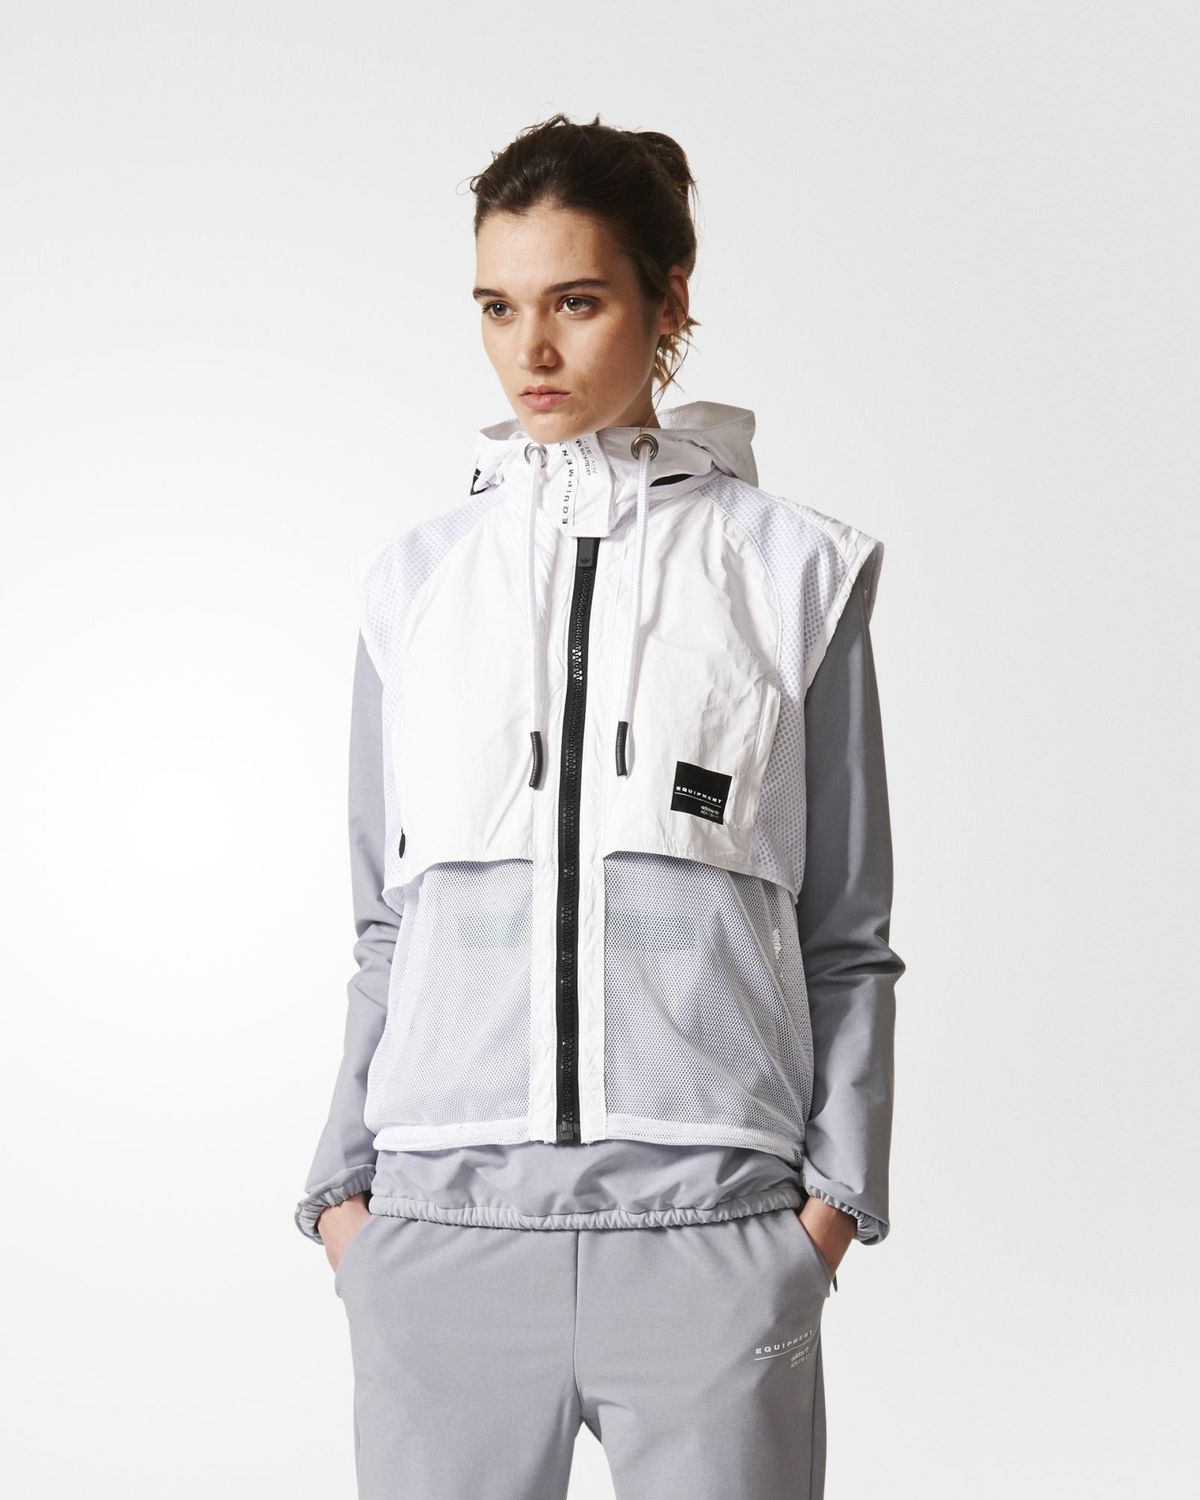 Running Vest for Transitional Weather - Lead